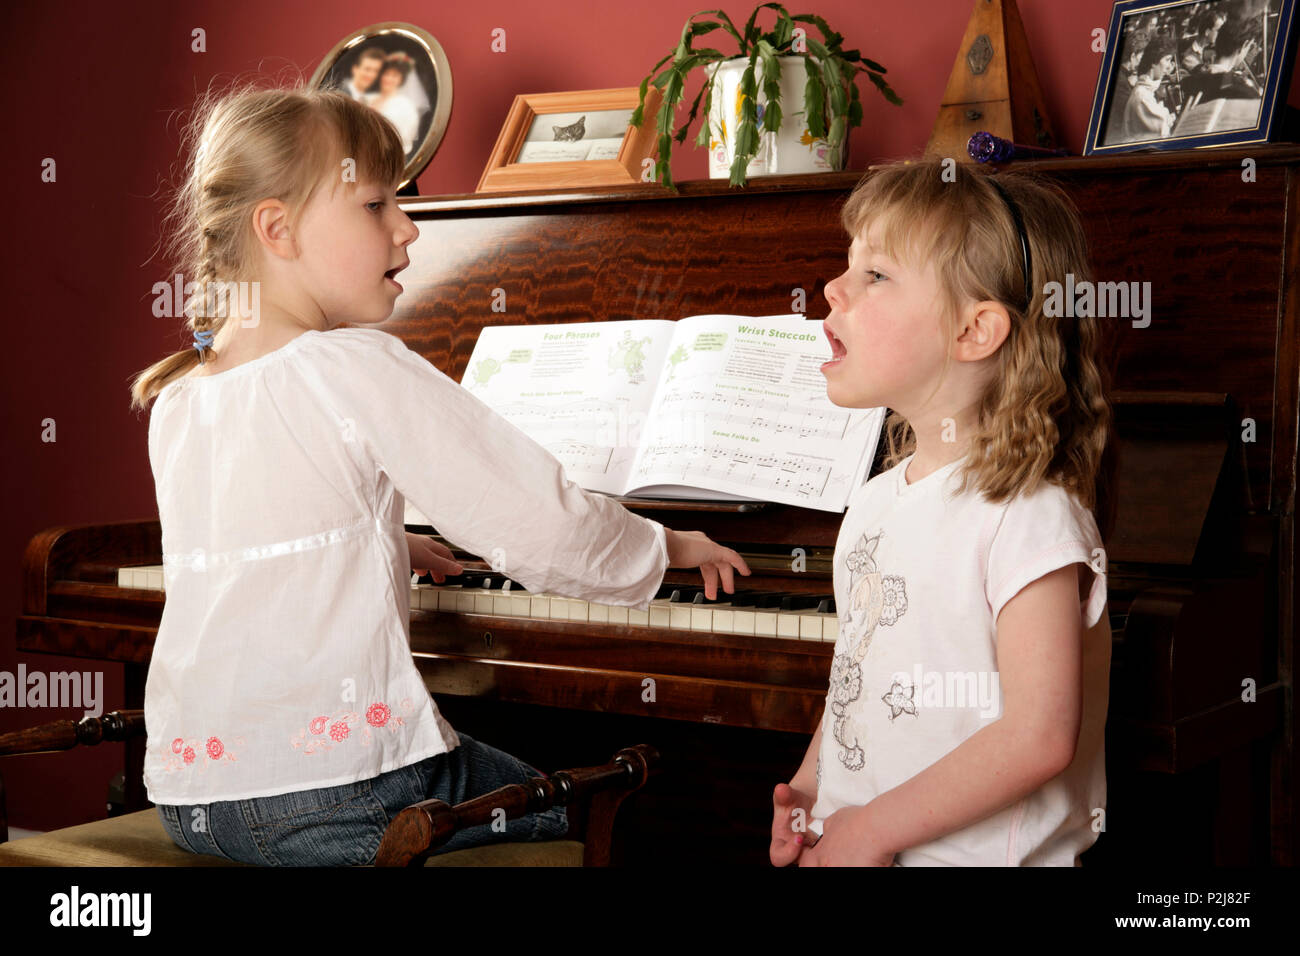 Two young girls singing whilst one also plays the piano. Room setting. Stock Photo